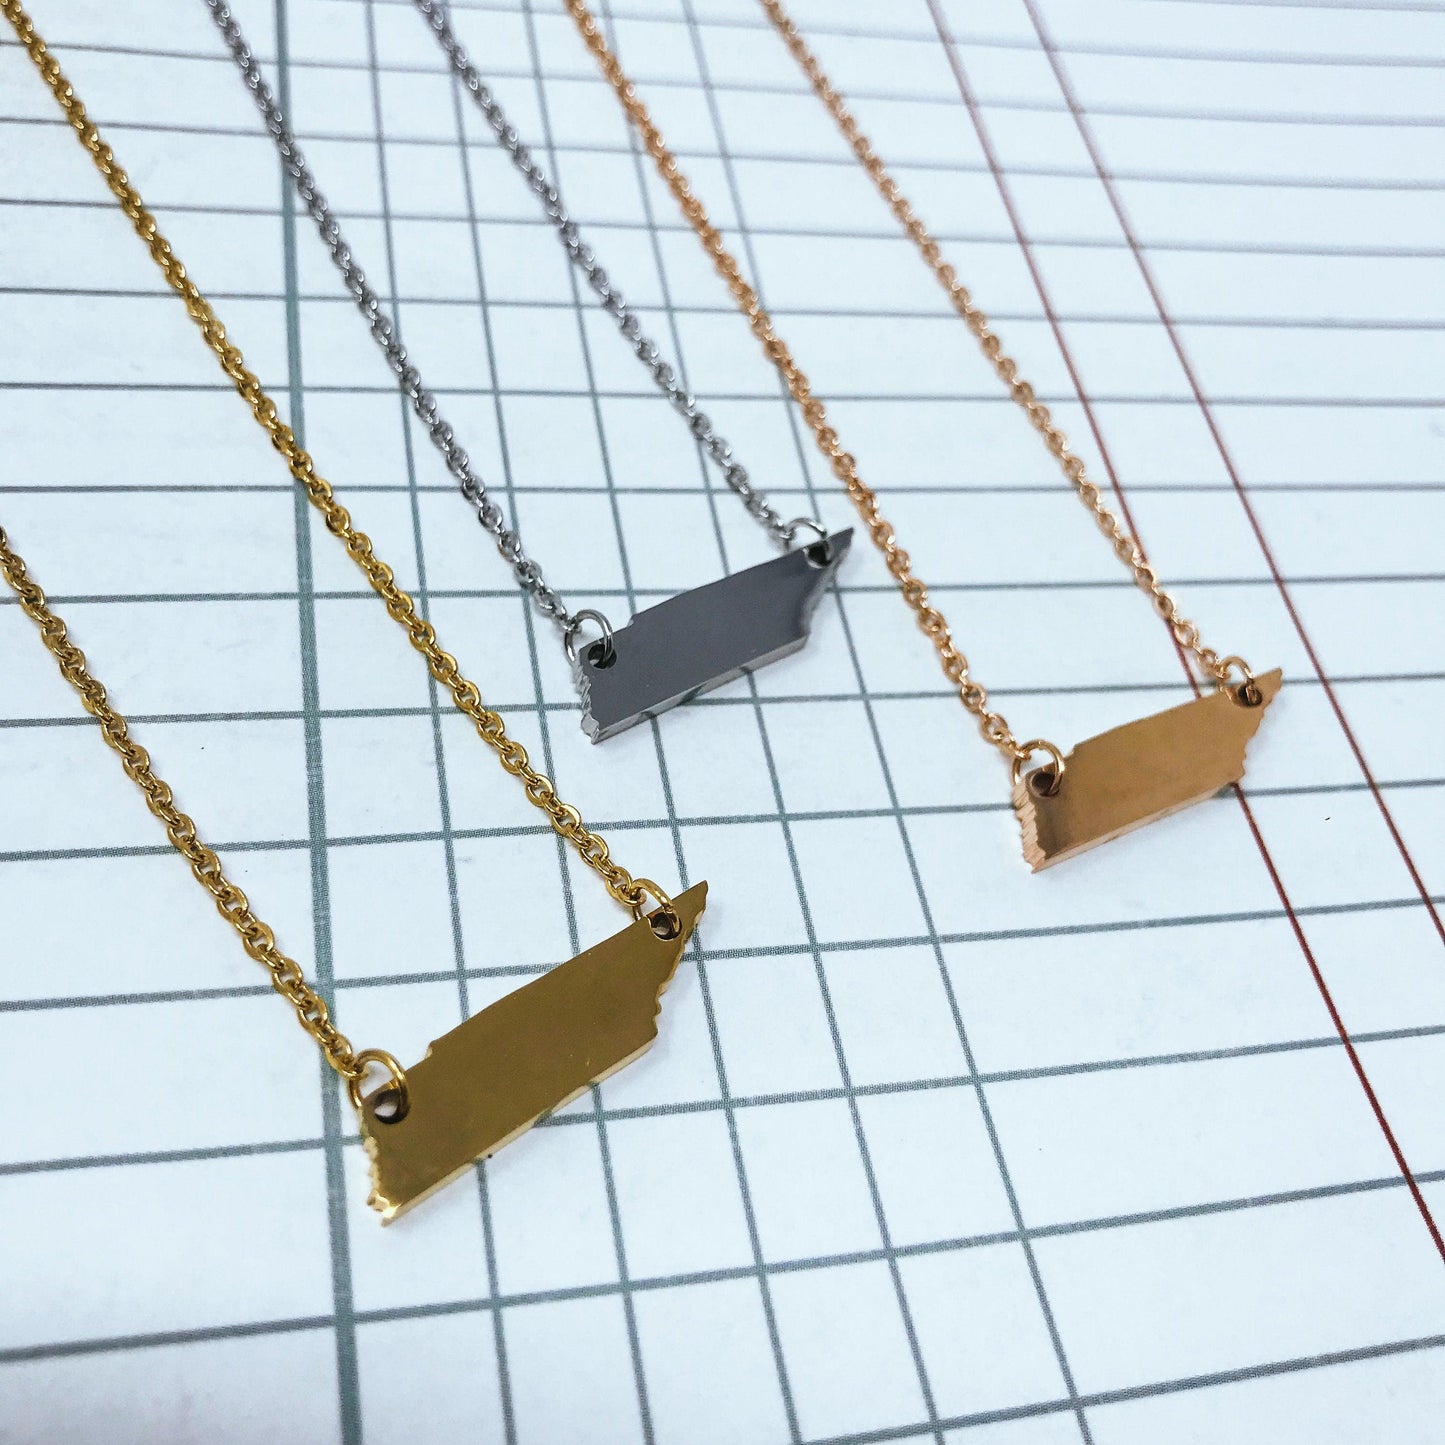 Tennessee State Silhouette Necklaces in 3 different colors: Gold, Silver & Rose Gold